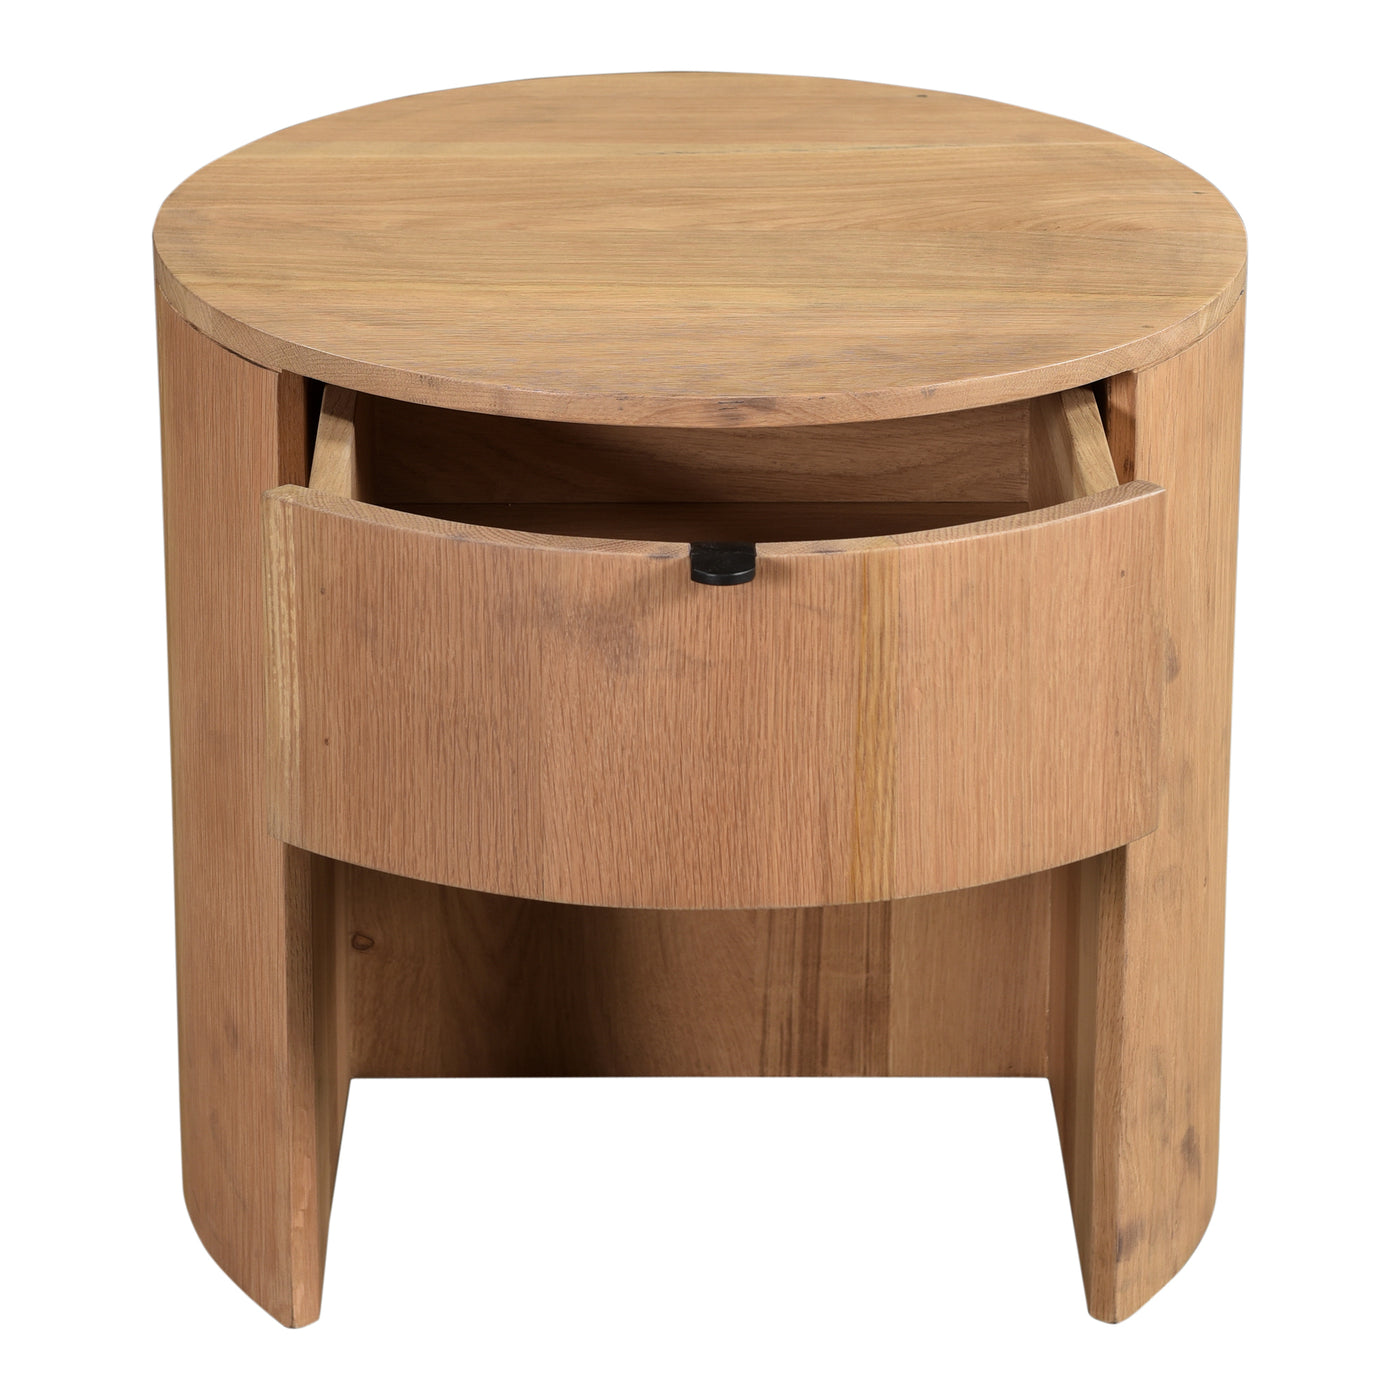 Beautifully organic. Crafted from solid oak, the round Theo nightstand features a natural finish highlighting the wood's o...